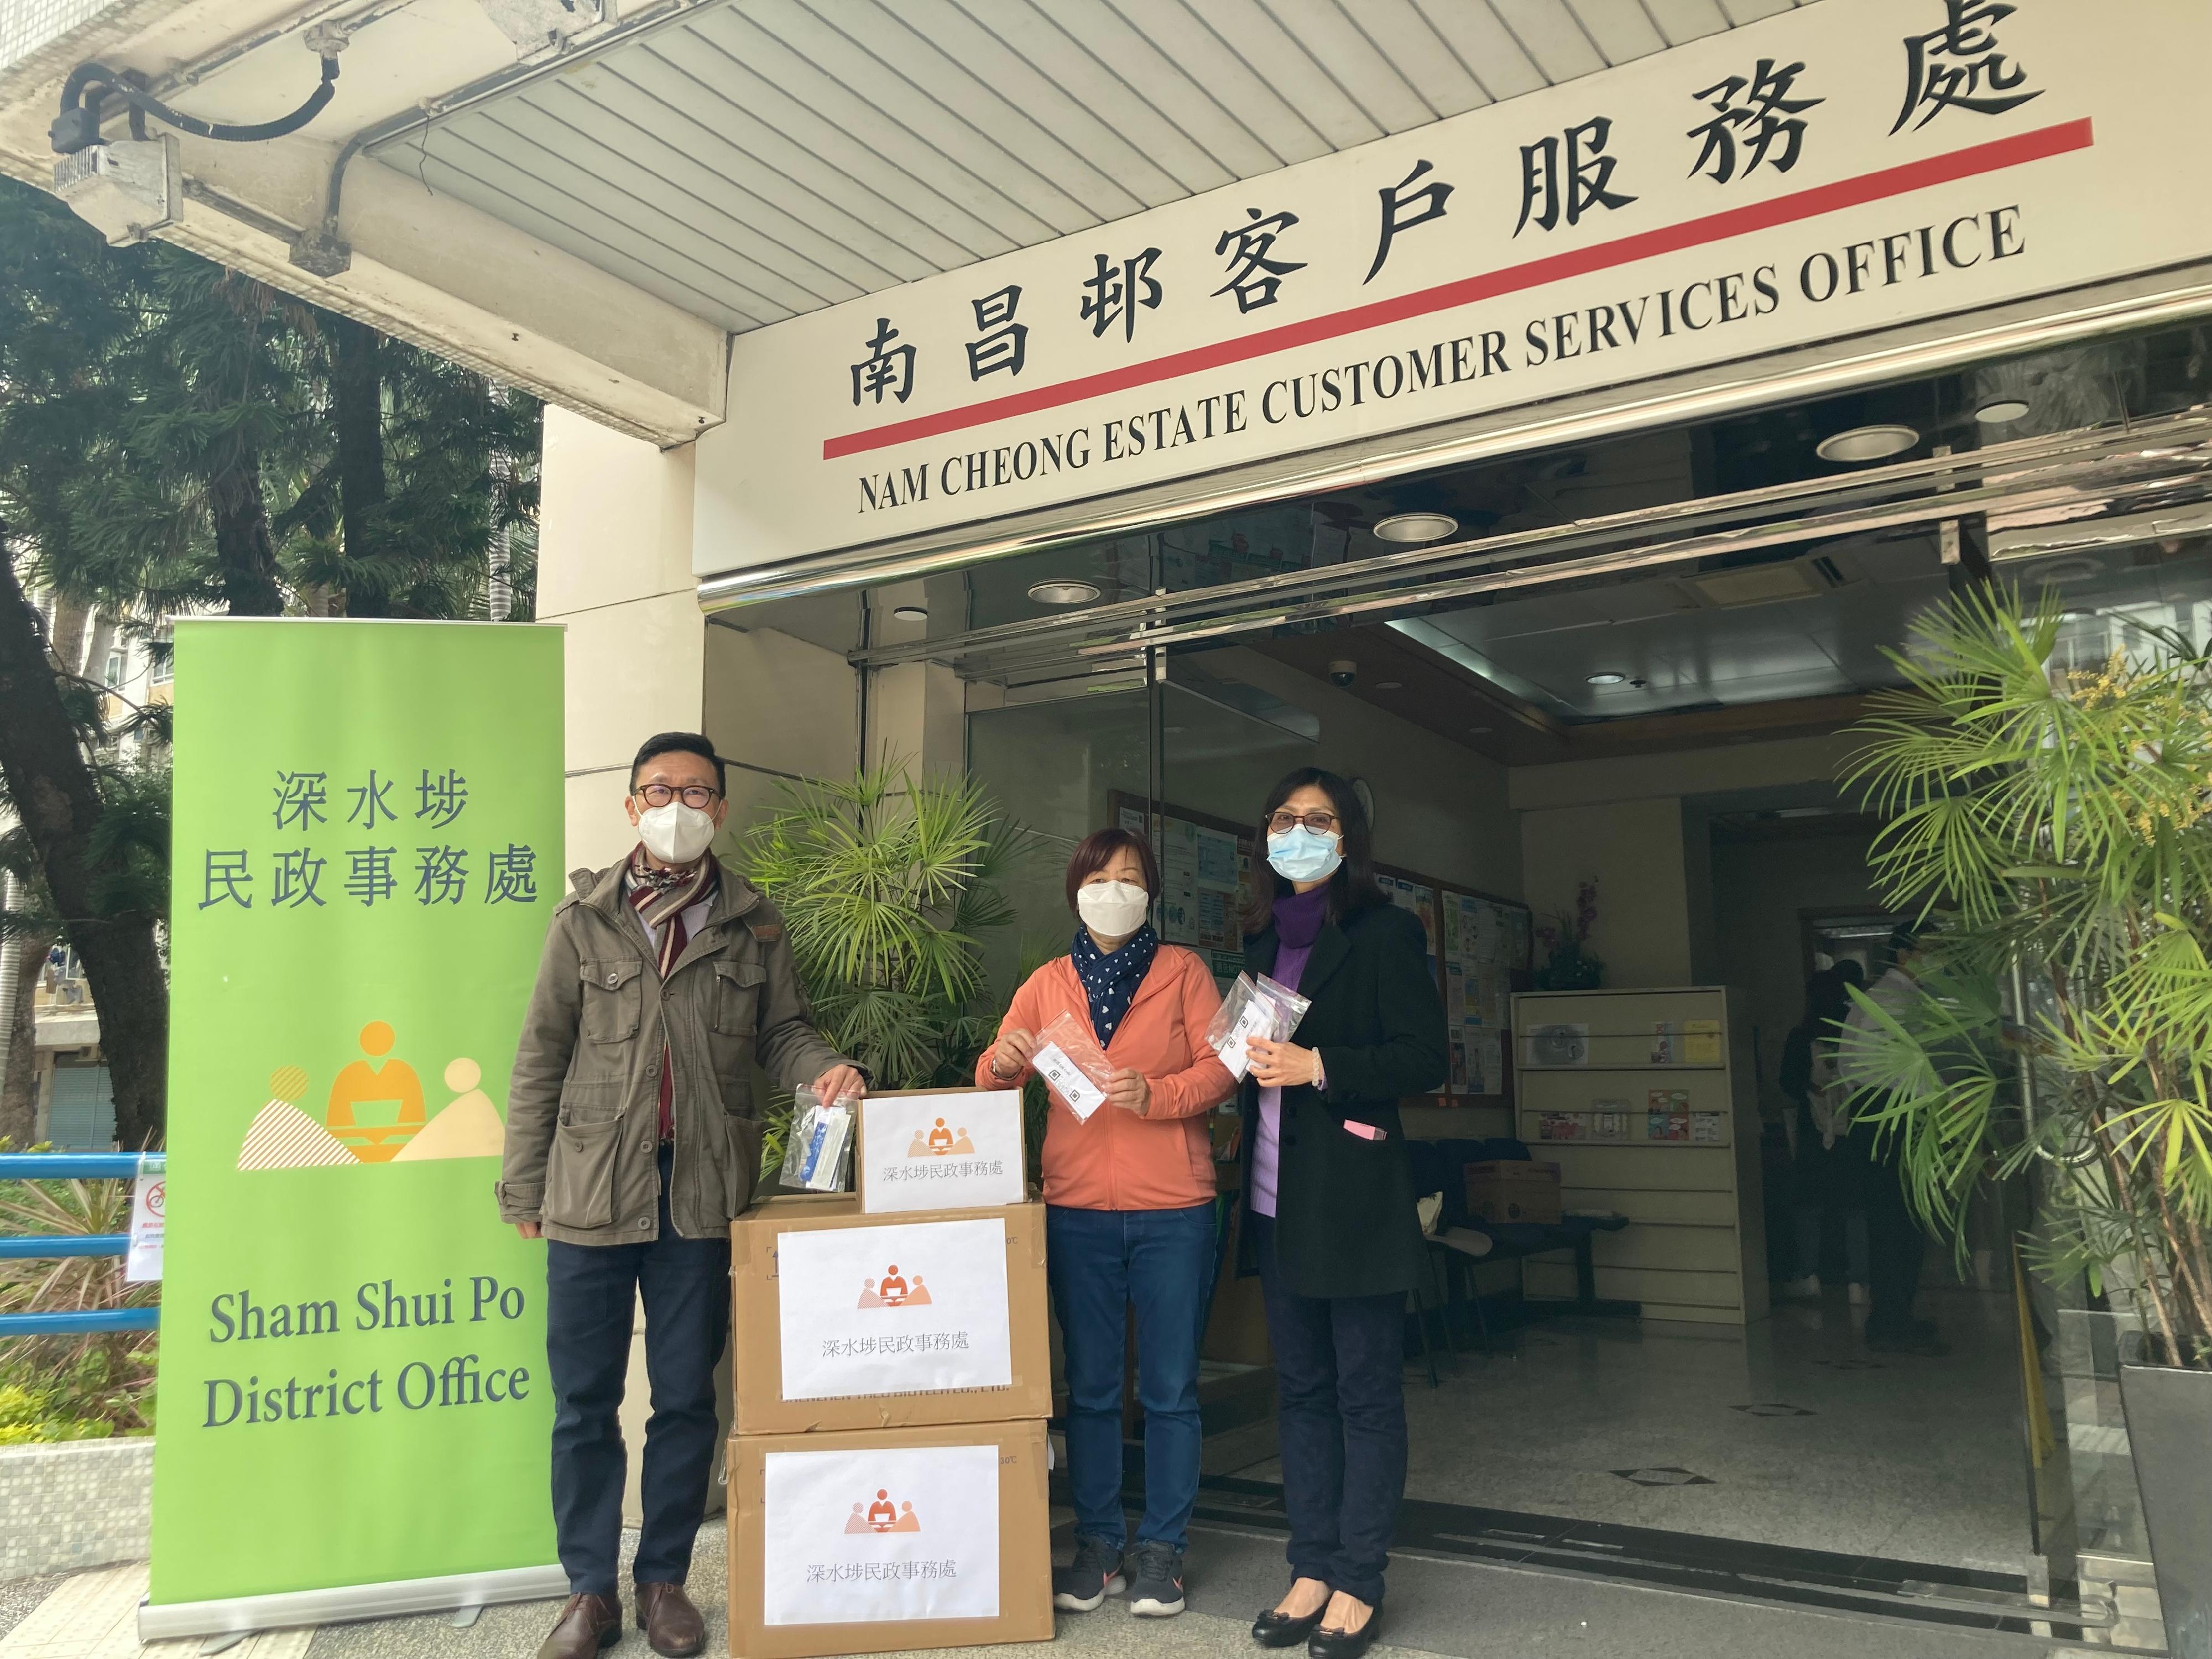 The Sham Shui Po District Office today (February 23) distributed COVID-19 rapid test kits to households, cleansing workers and property management staff living and working in Cheong Yat House and Cheong Him House for voluntary testing through the owners' corporation and the property management company of Nam Cheong Estate.